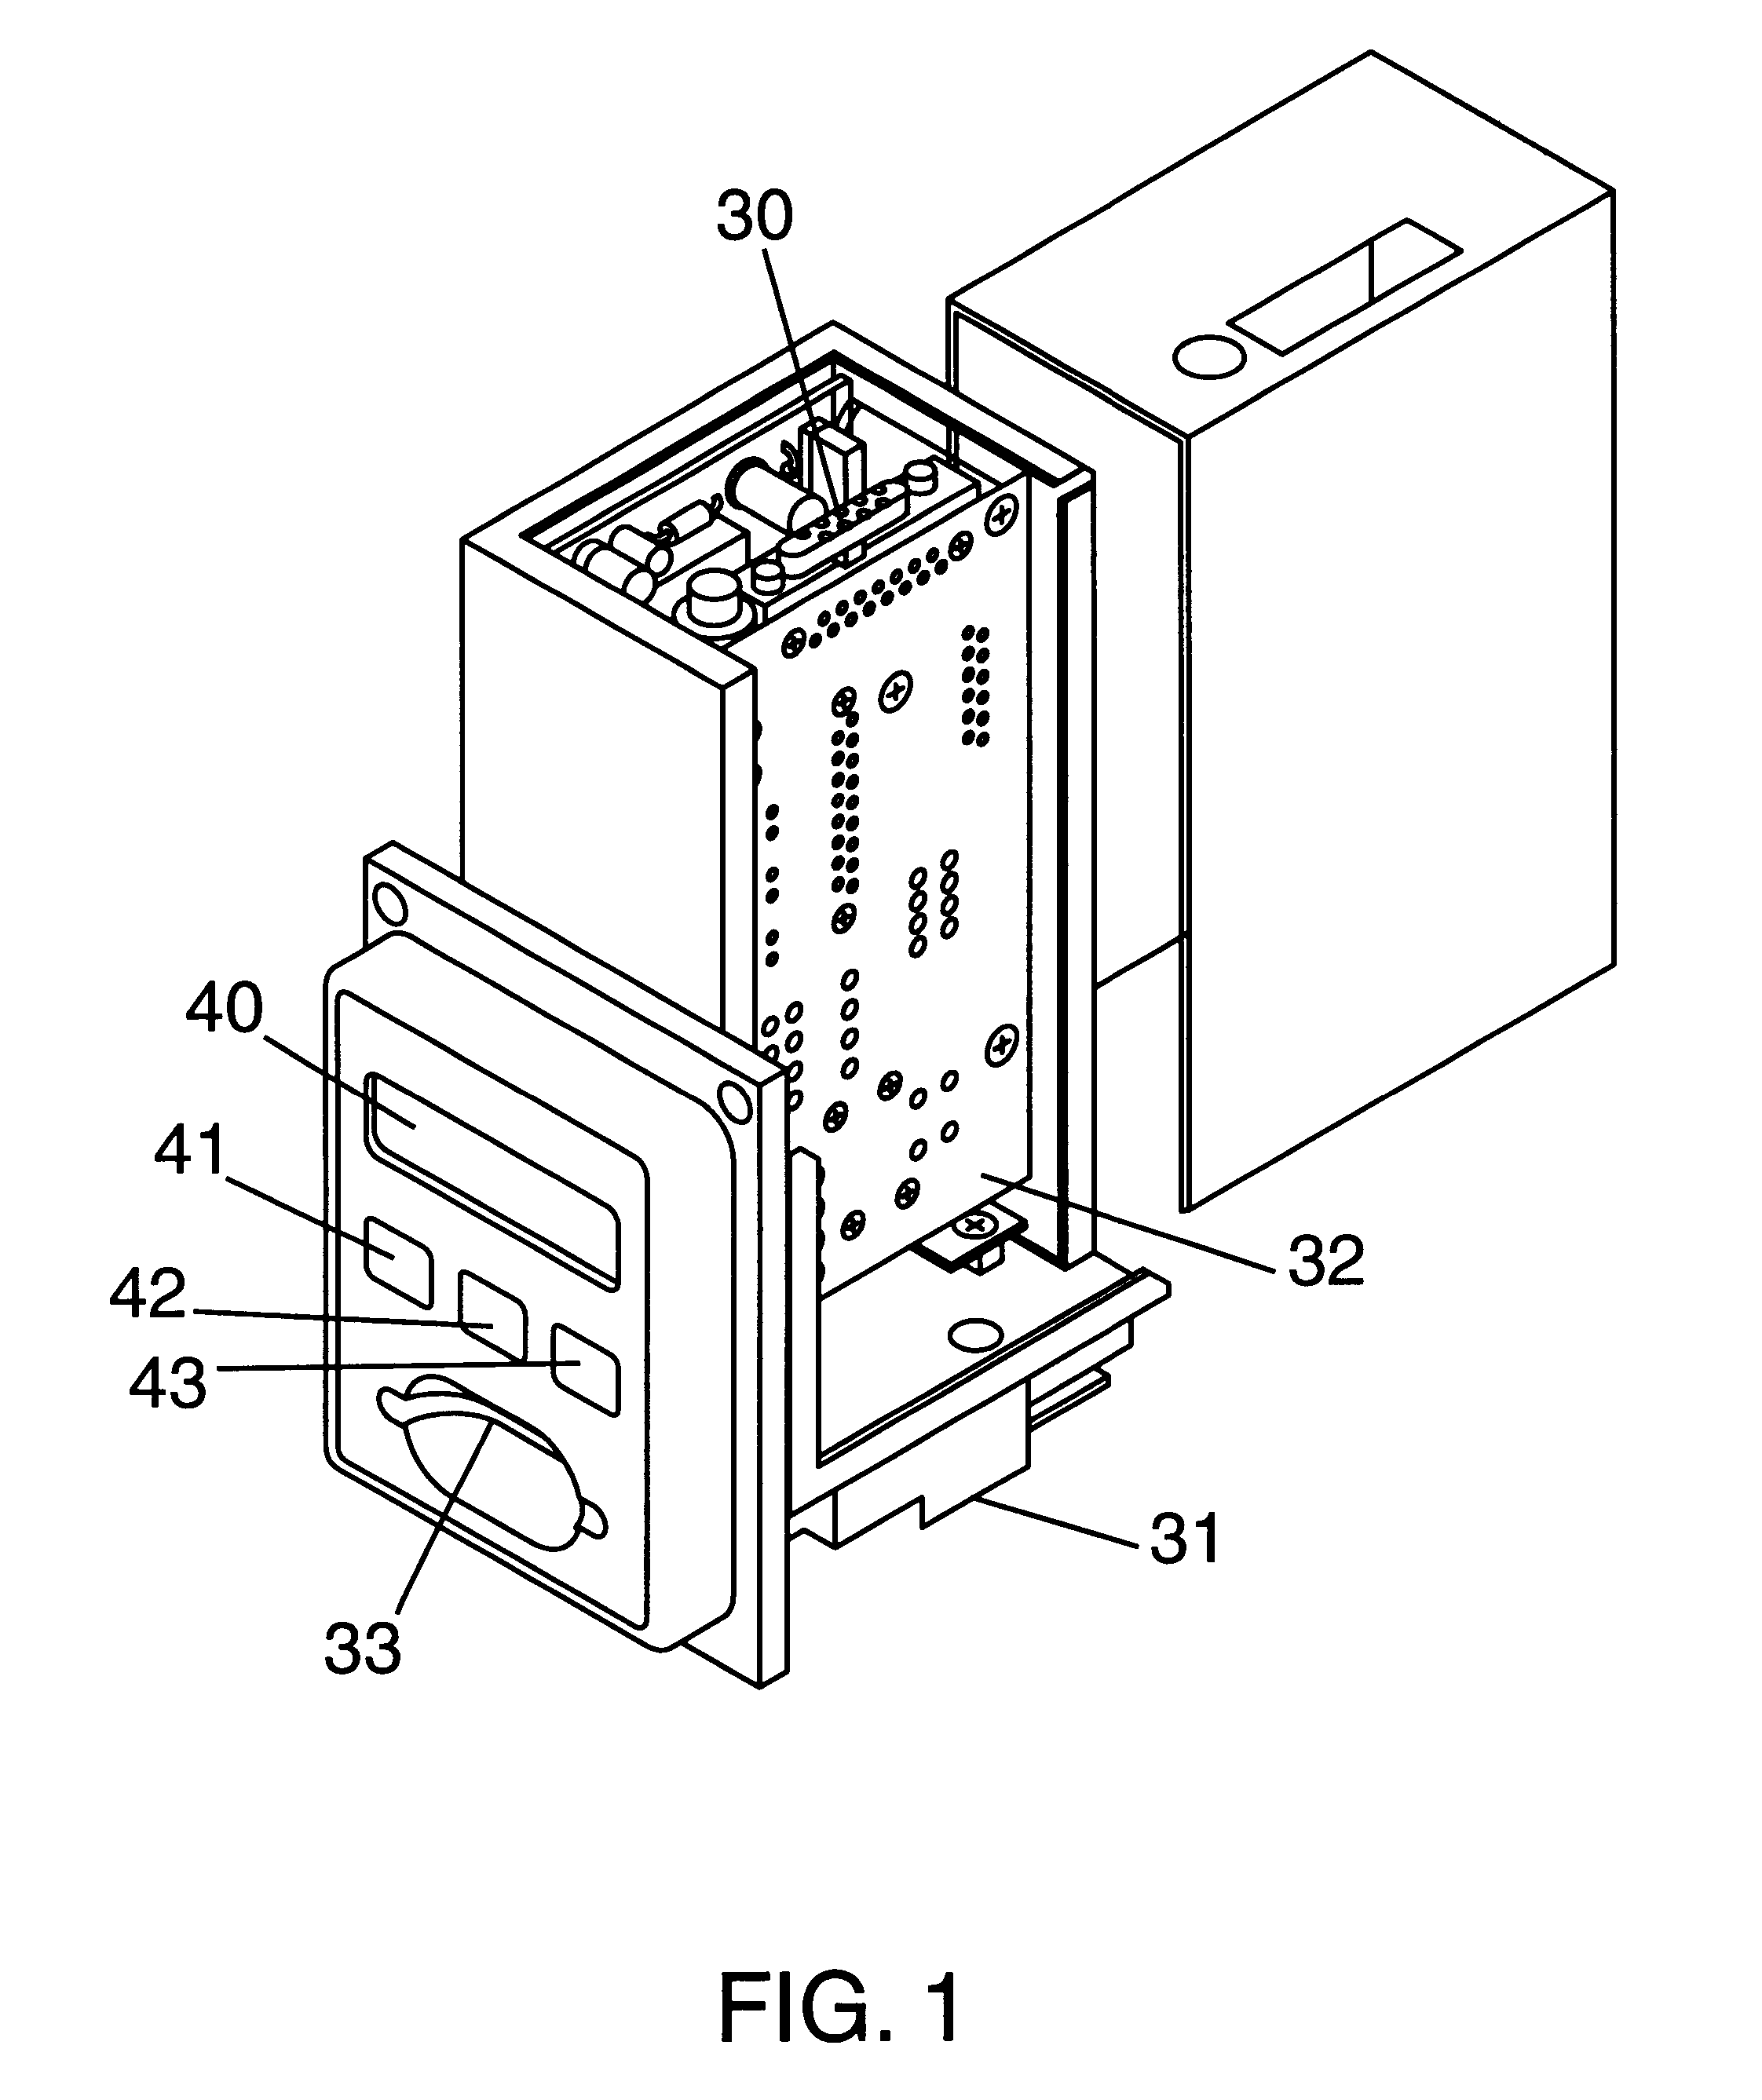 Card interface for interfacing a host application program to data storage cards